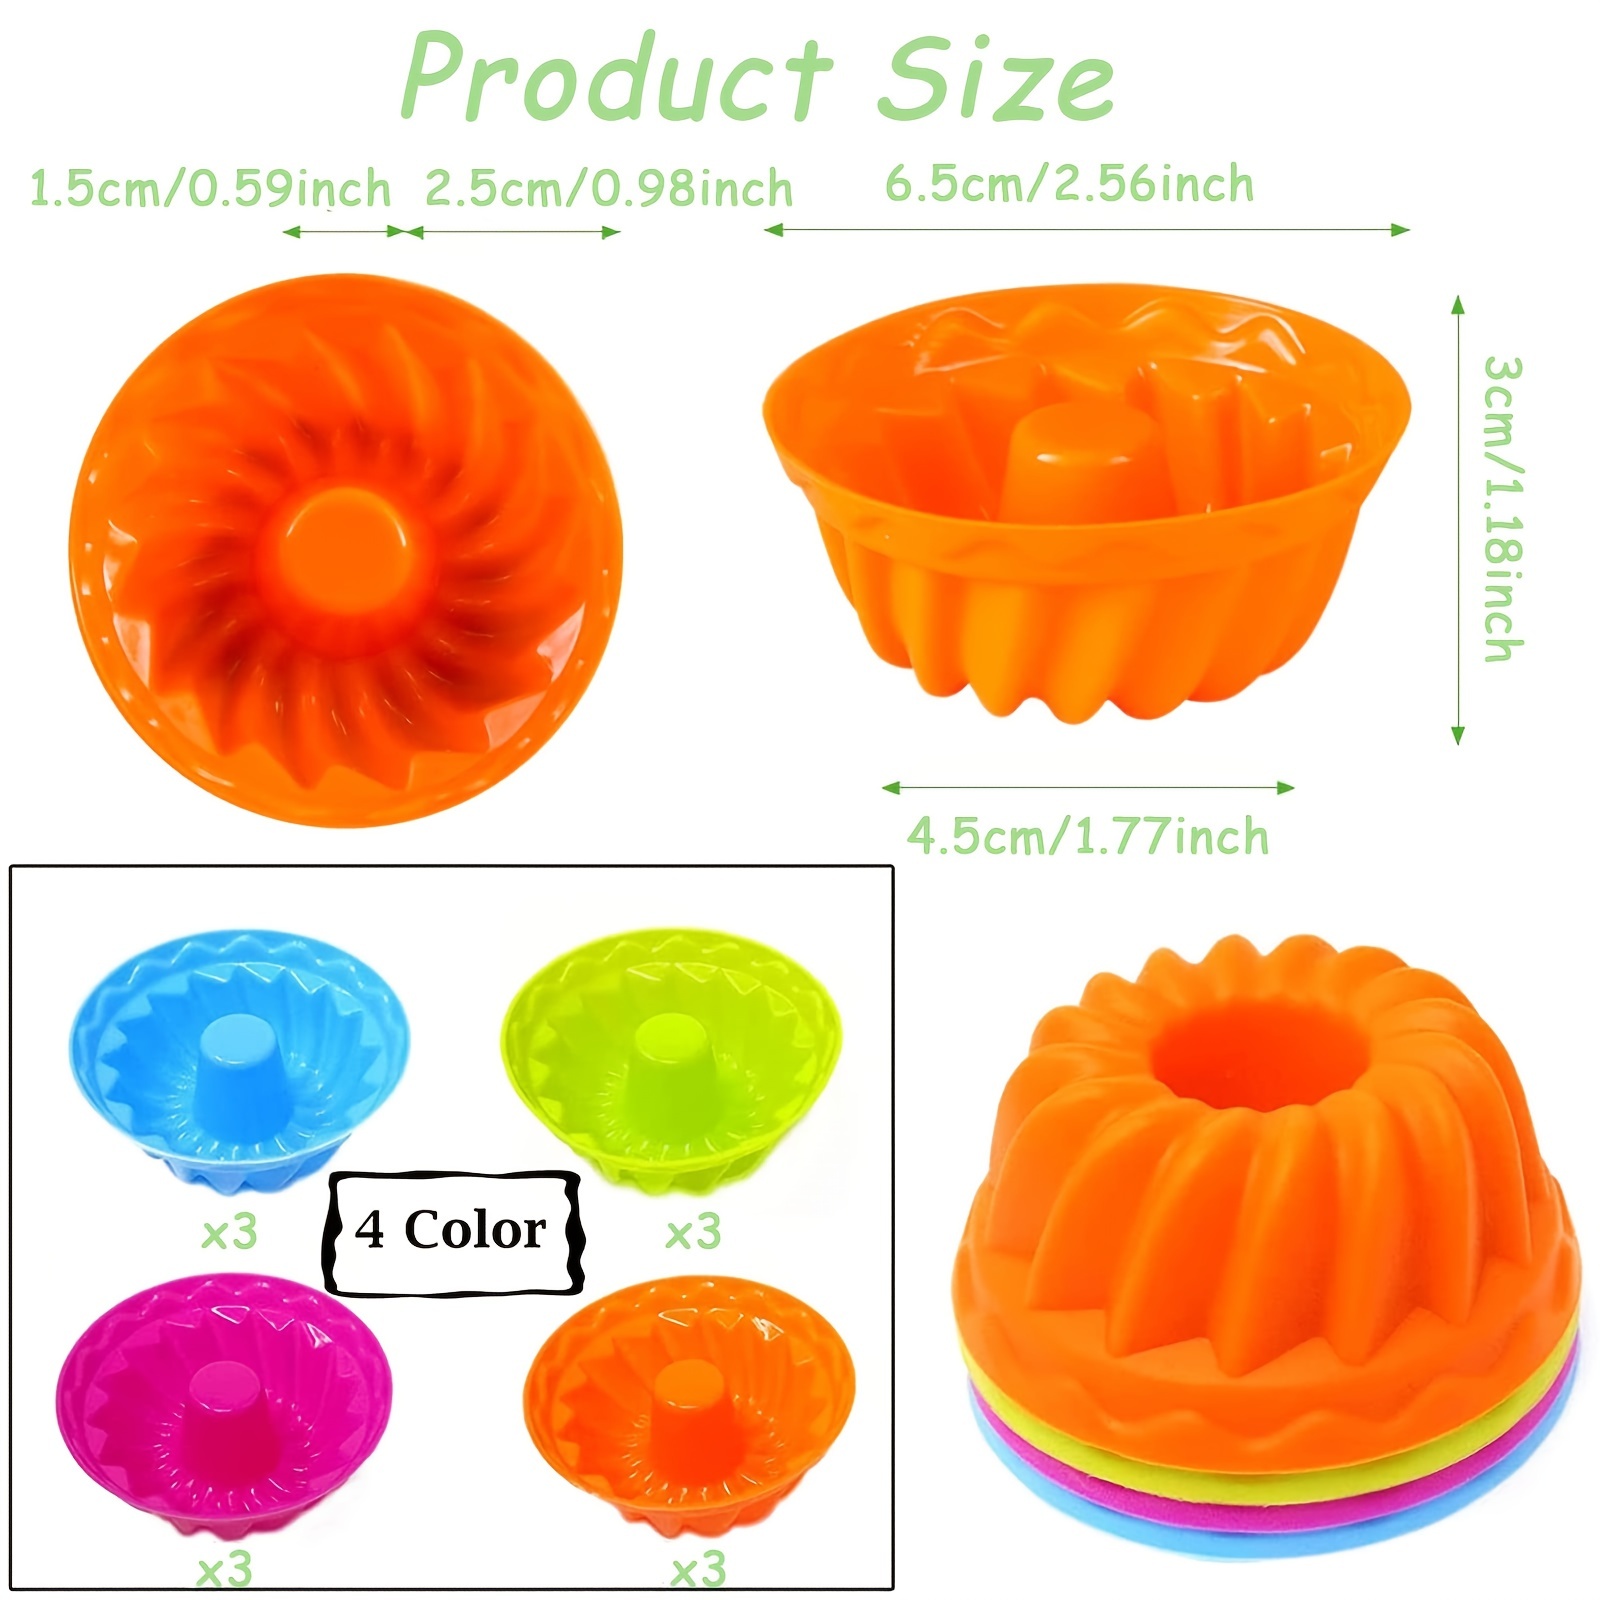  Pantry Elements Silicone Cupcake Liners for Baking and Bonus  Gift Jar, Pack of 12 Reusable Muffin Liners Baking Cups Molds for Baking,  Bento Lunch Box Accessories, Moldes de Silicona Para Reposteria 